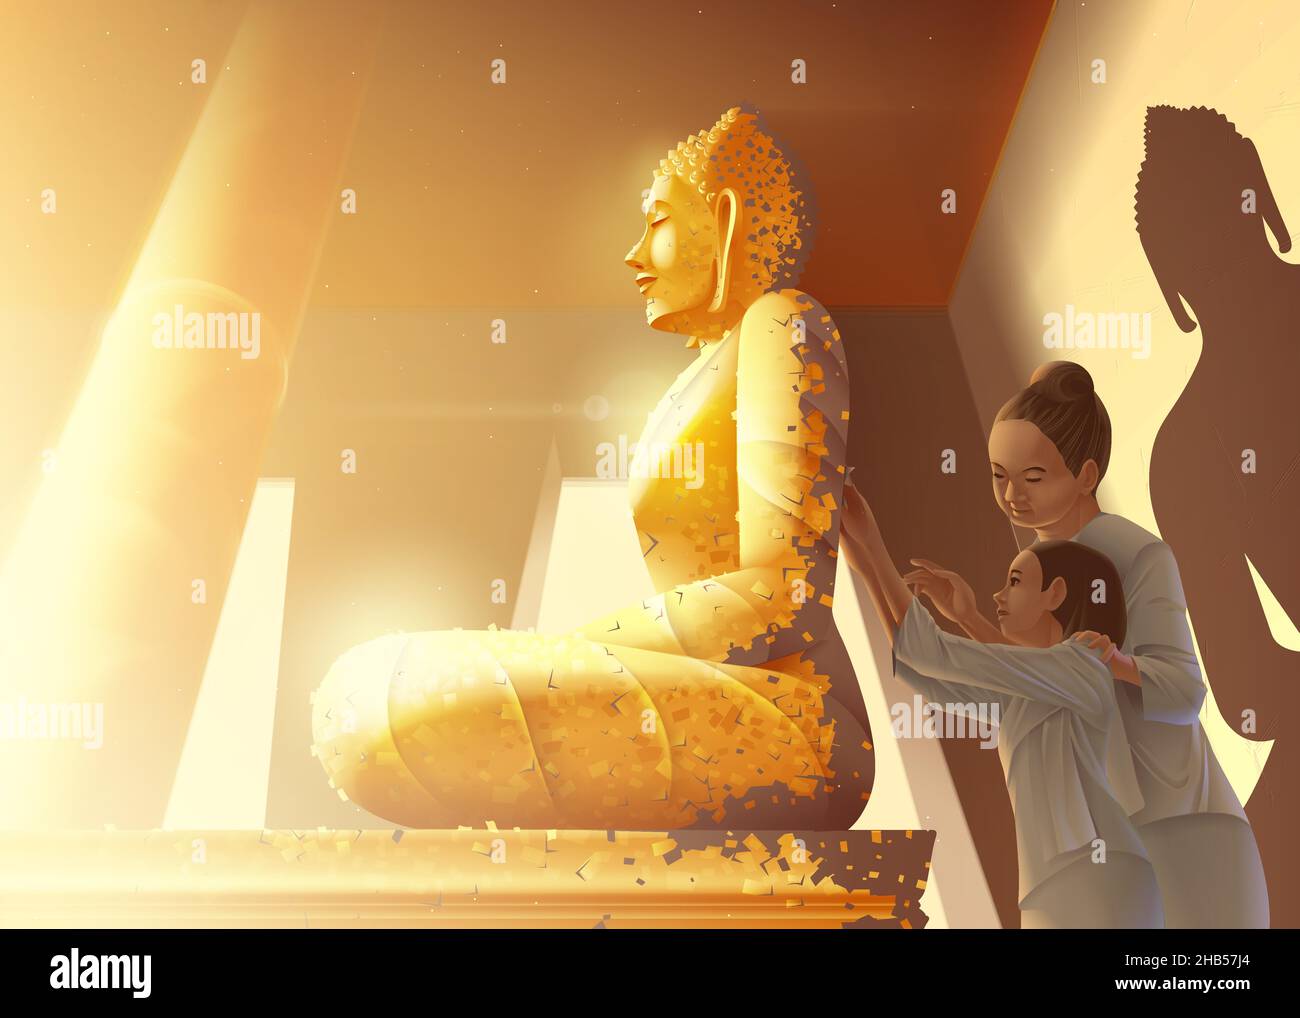 Buddhism vector illustration of auntie is guiding her granddaughter to gild the gold leaf on buddha statue and teaching her about ancient Thai idiom o Stock Vector